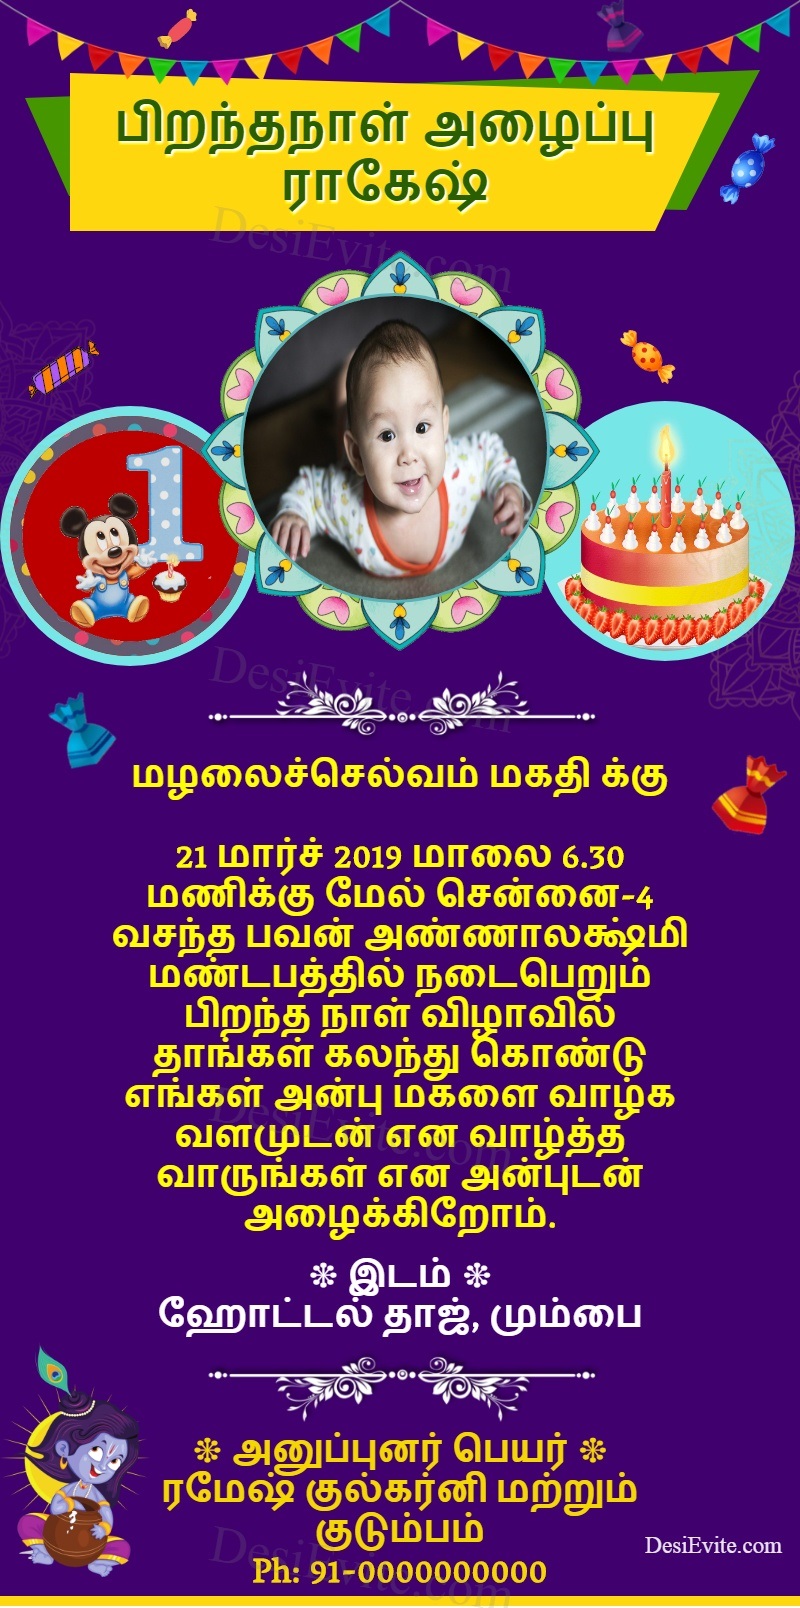 Tamil birthday invitation card in marathi with photo upload template 83